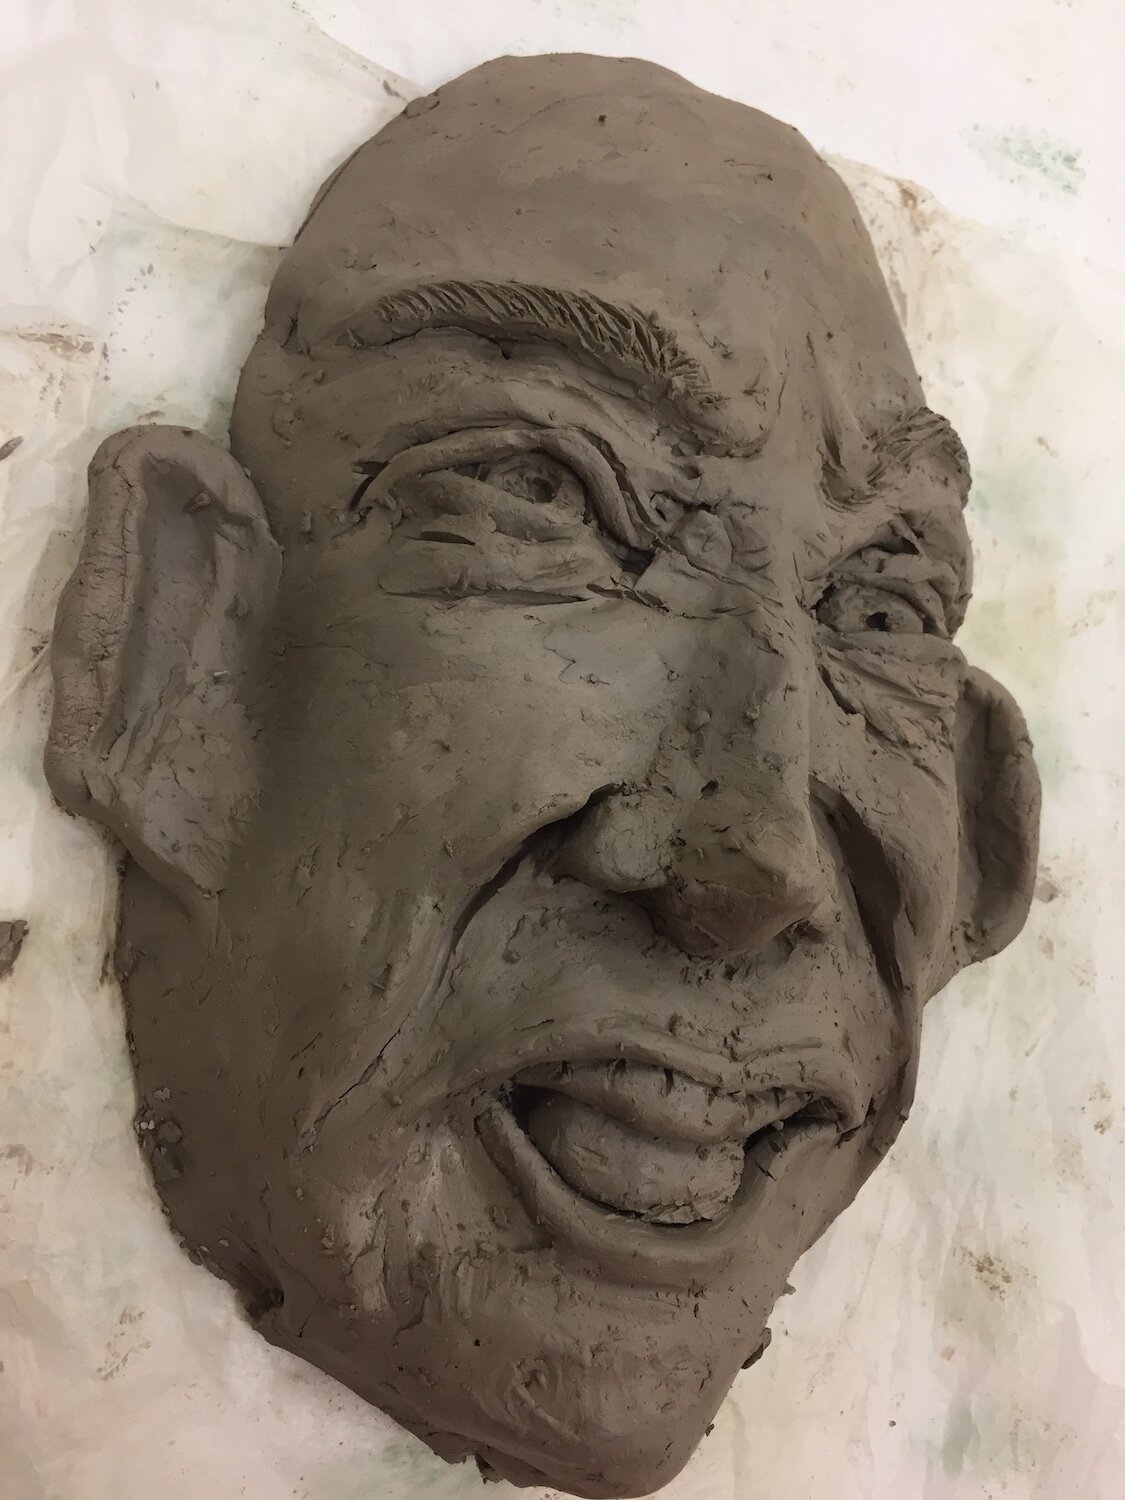 Professional Development Activity Away Day, Perth, Disgusted Facial Expression of Emotion, Clay Sculpture